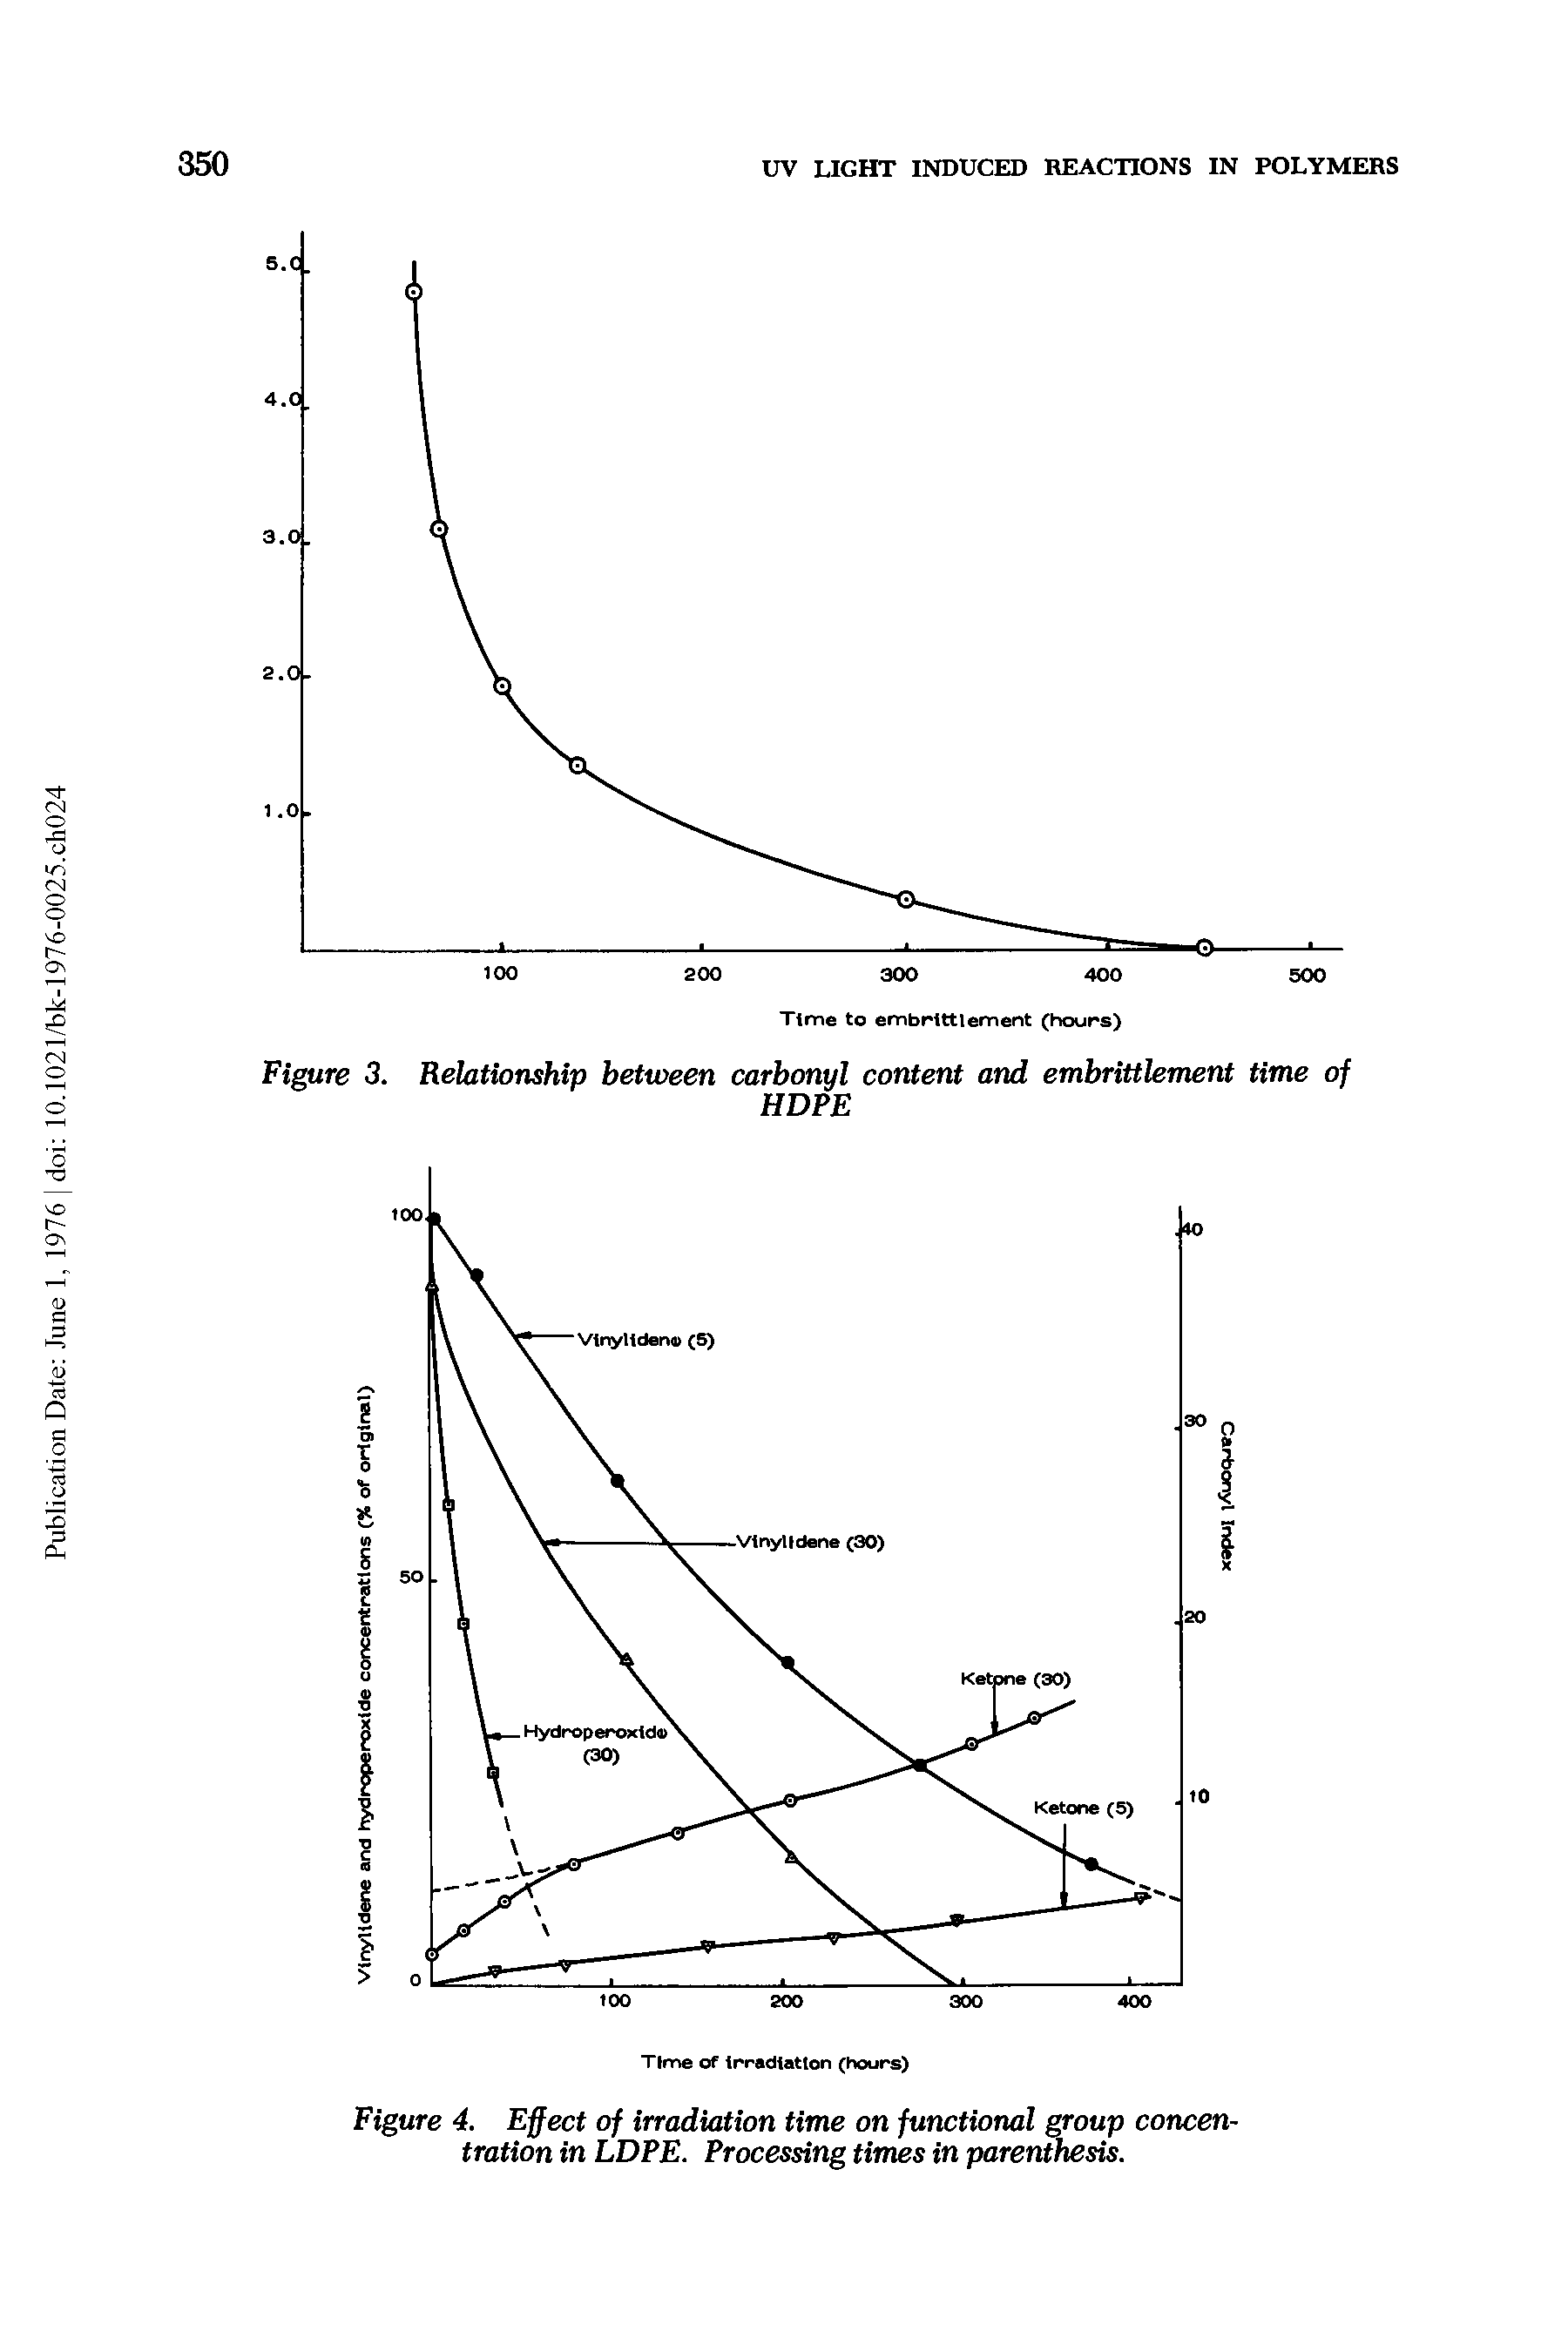 Figure 4. Effect of irradiation time on functional group concentration in LDPE. Processing times in parenthesis.